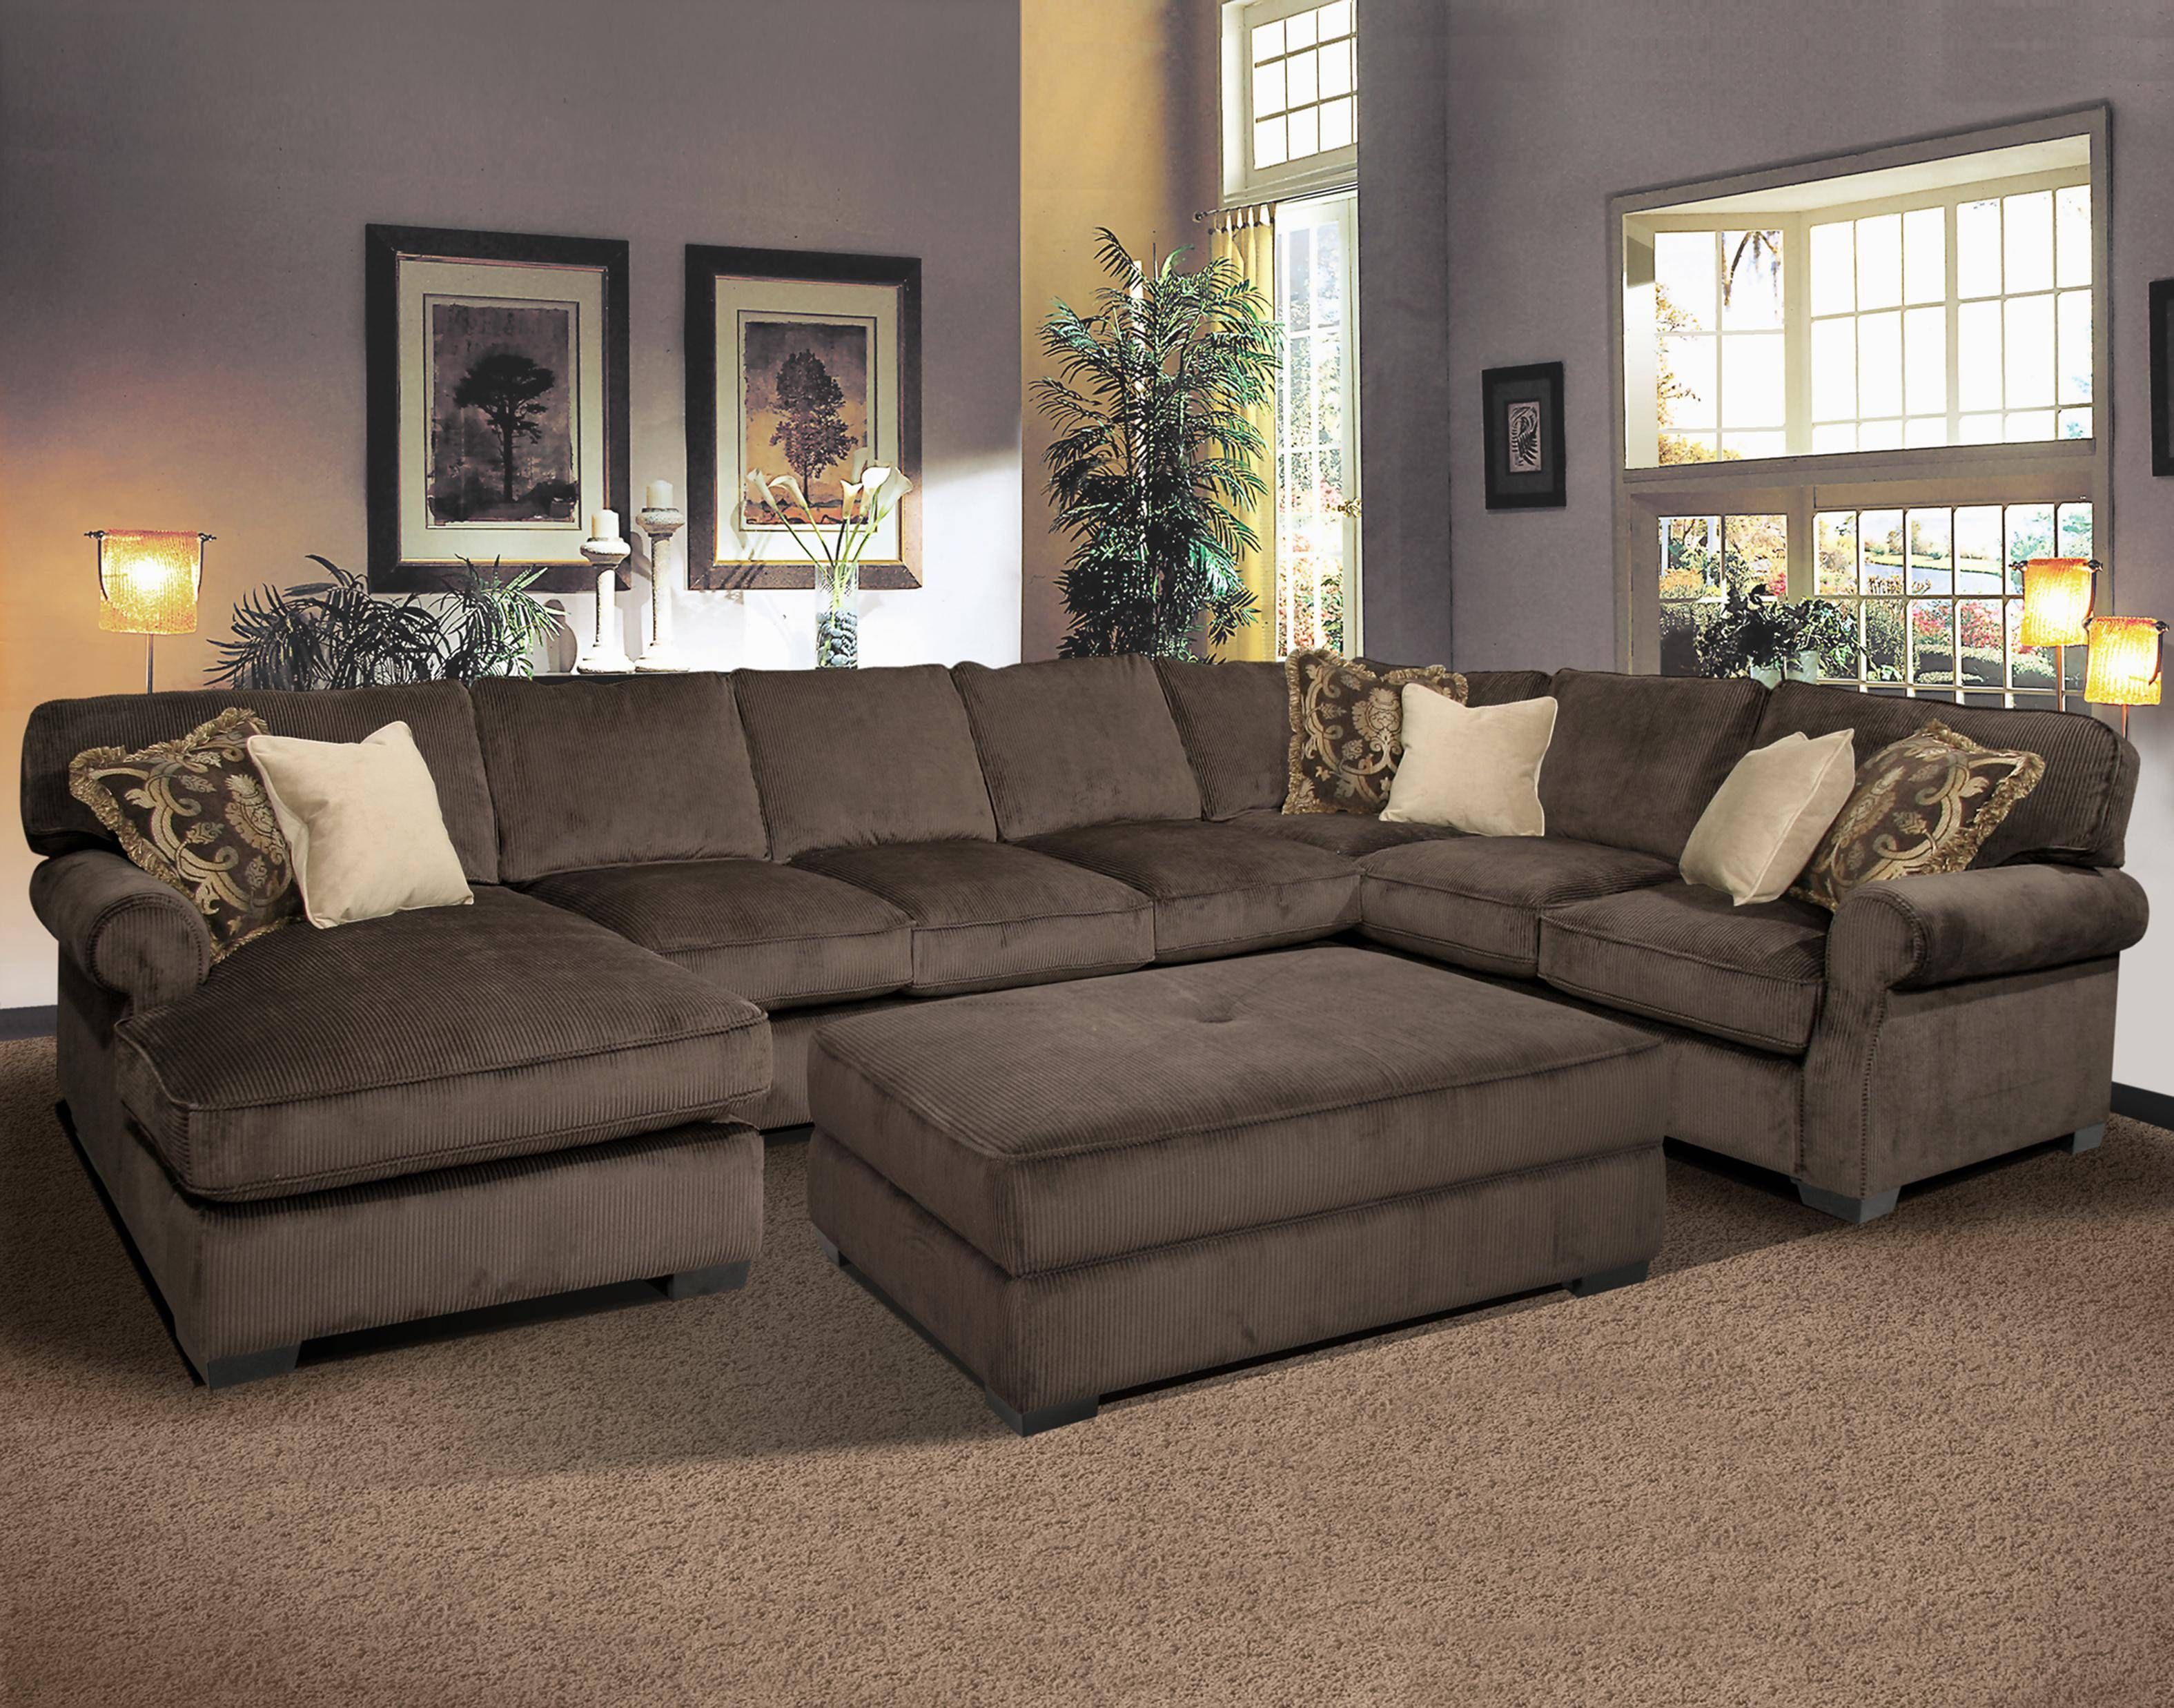 Awesome Sectional Sofa With Recliner And Chaise Lounge 45 With In Queen Sleeper Sofa Sheets (View 9 of 15)